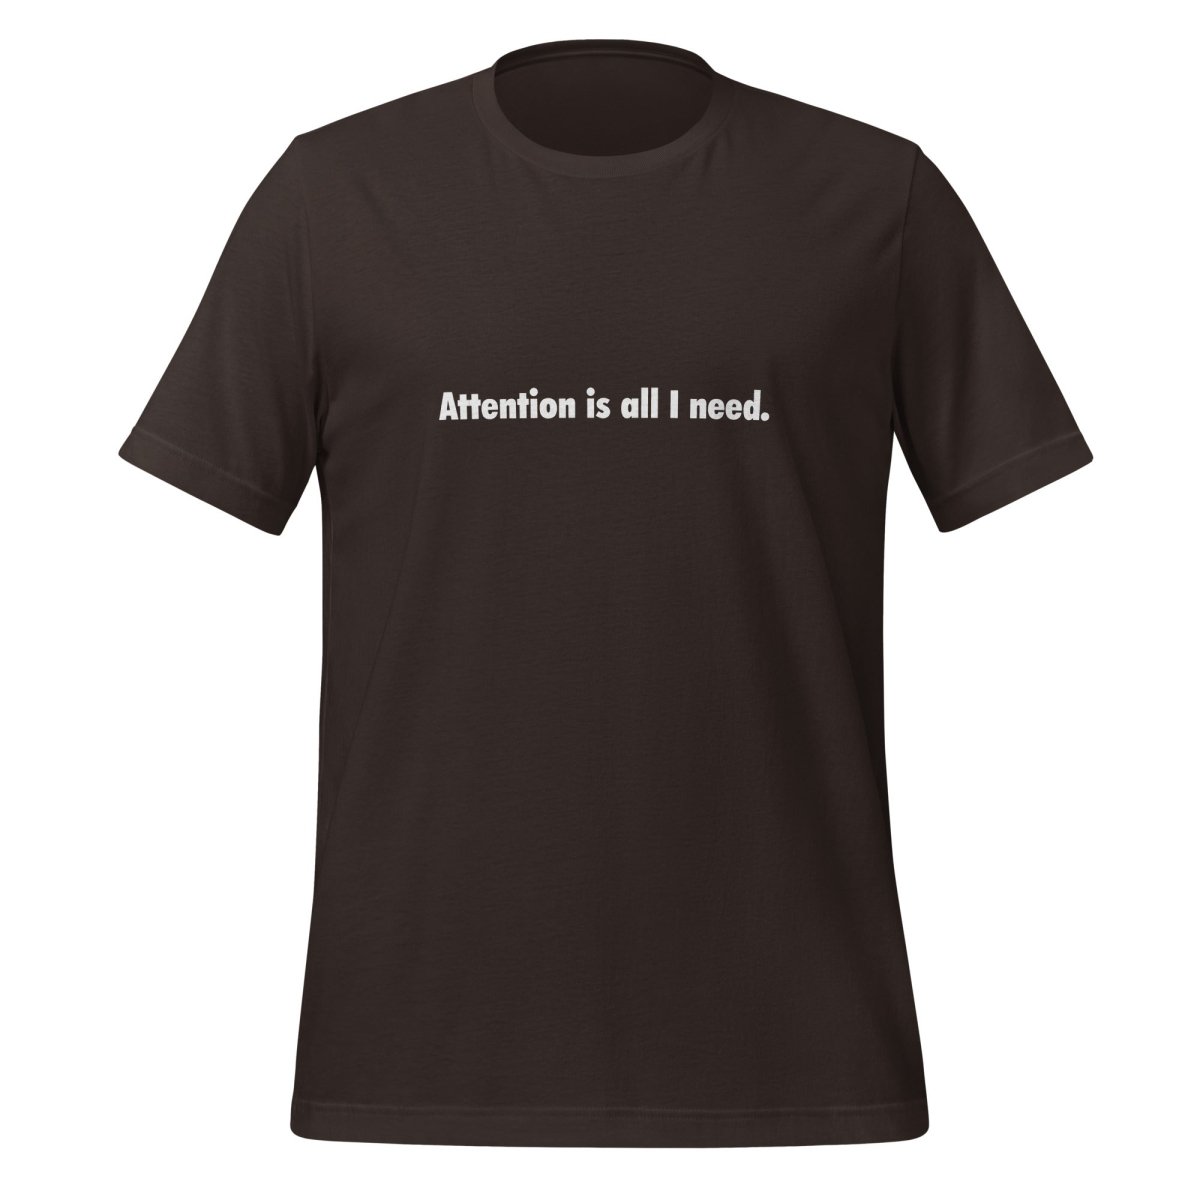 Attention is all I need. T - Shirt (unisex) - Brown - AI Store